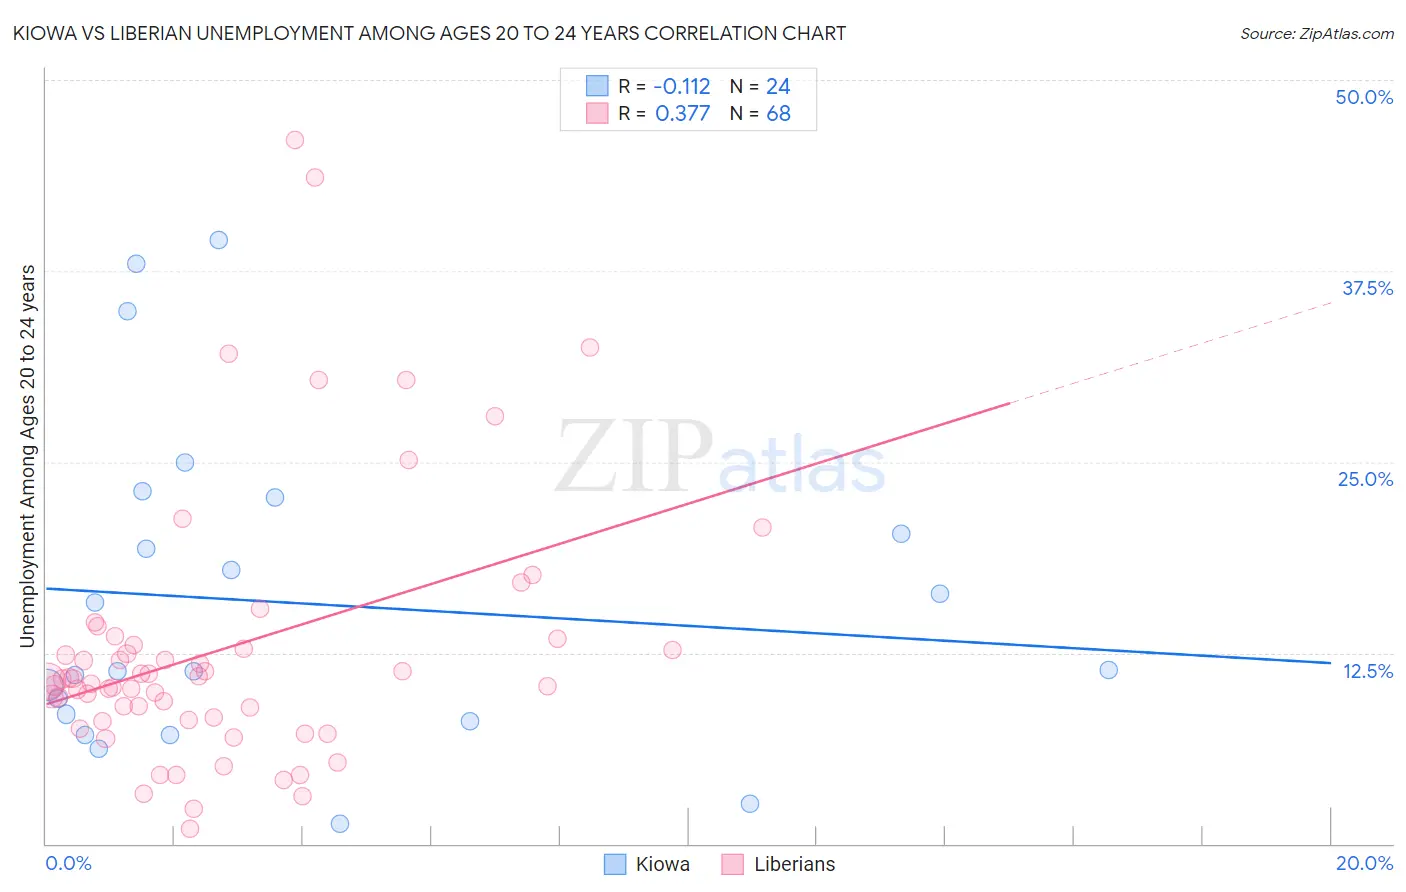 Kiowa vs Liberian Unemployment Among Ages 20 to 24 years